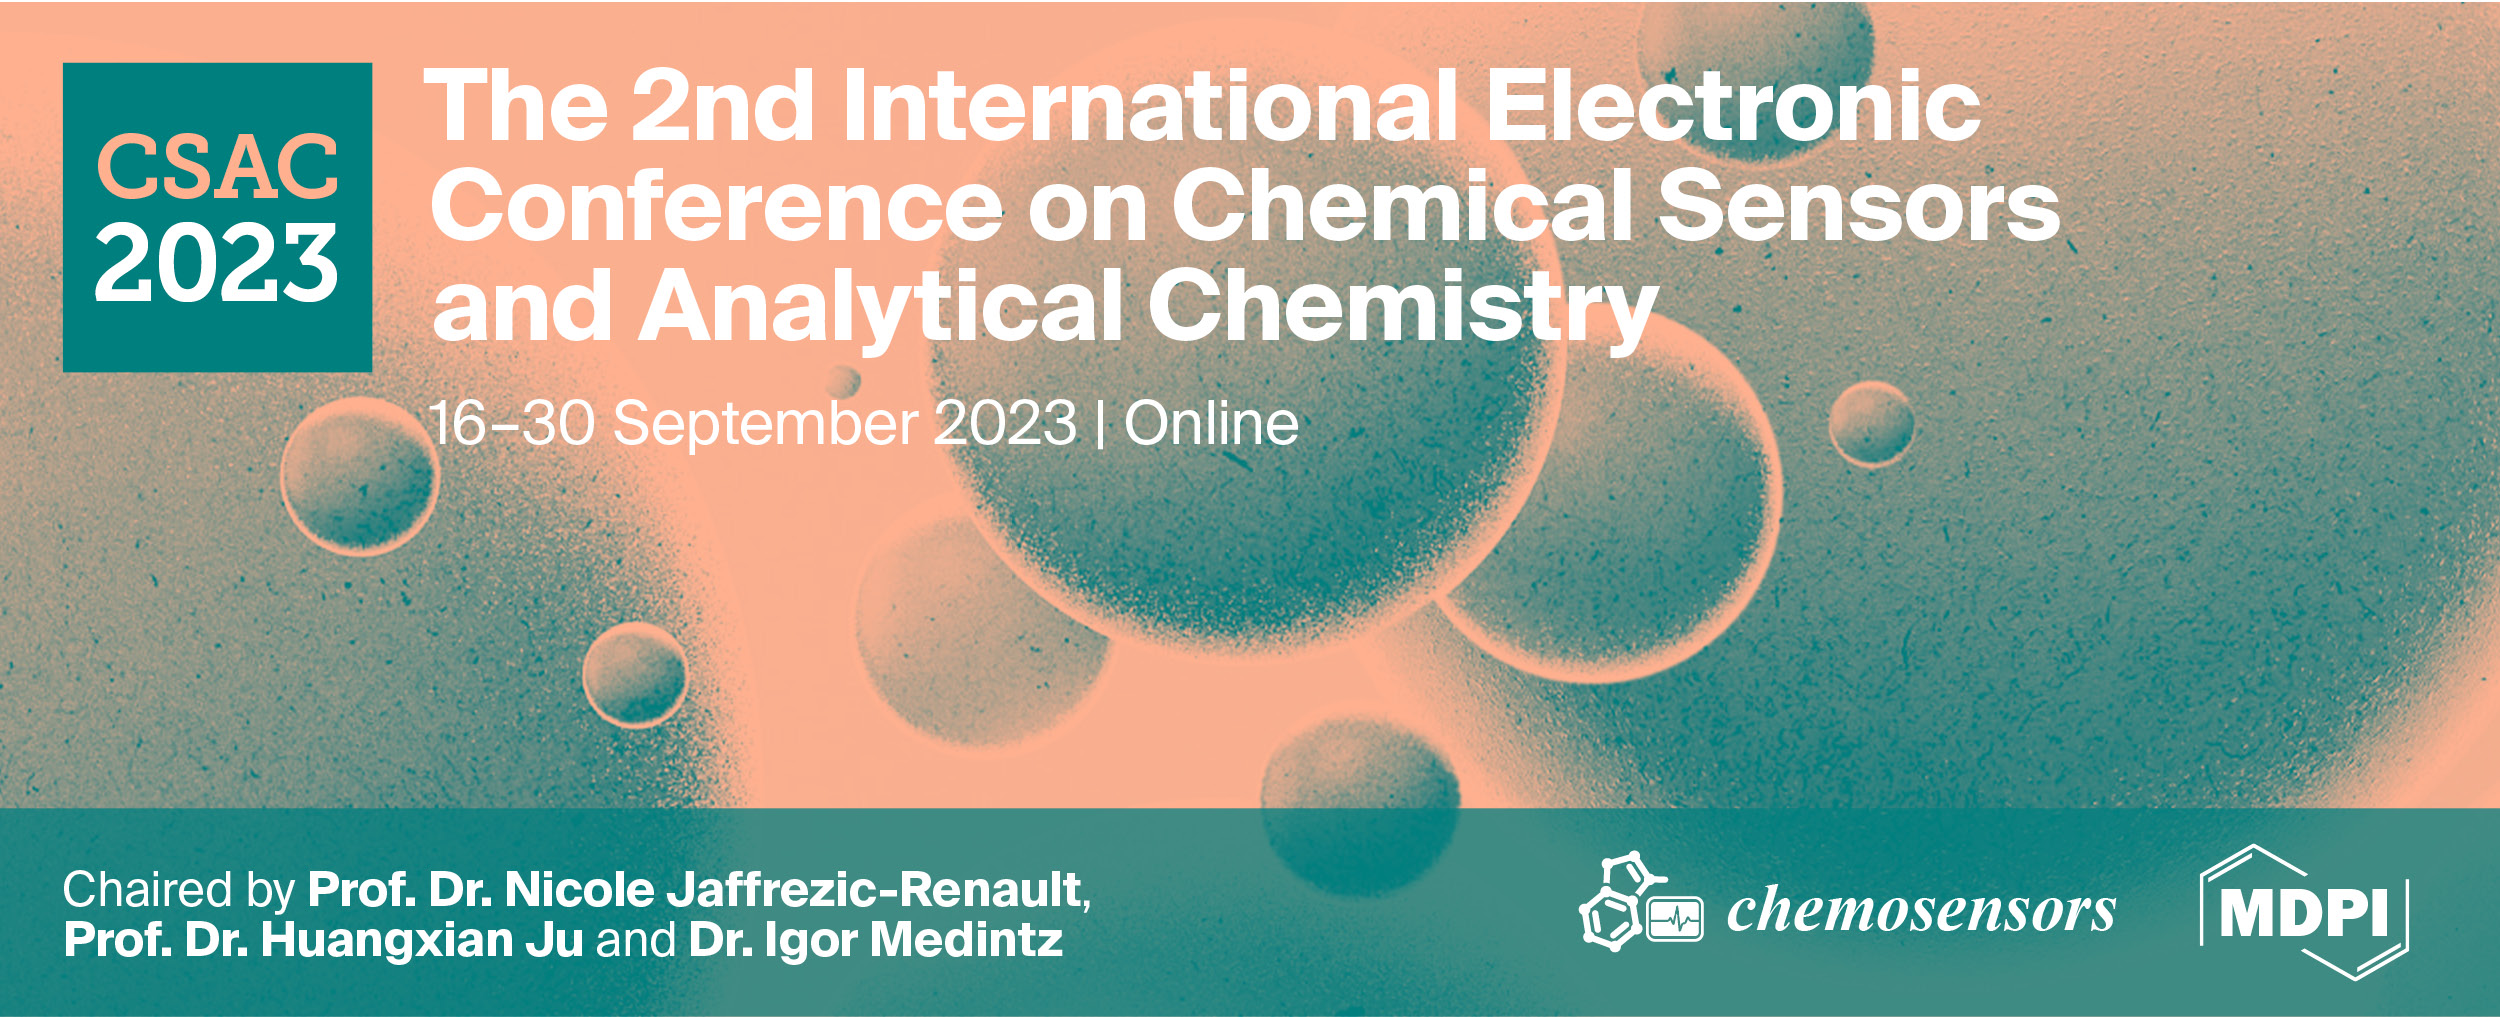 The 2nd International Electronic Conference on Chemical Sensors and Analytical Chemistry